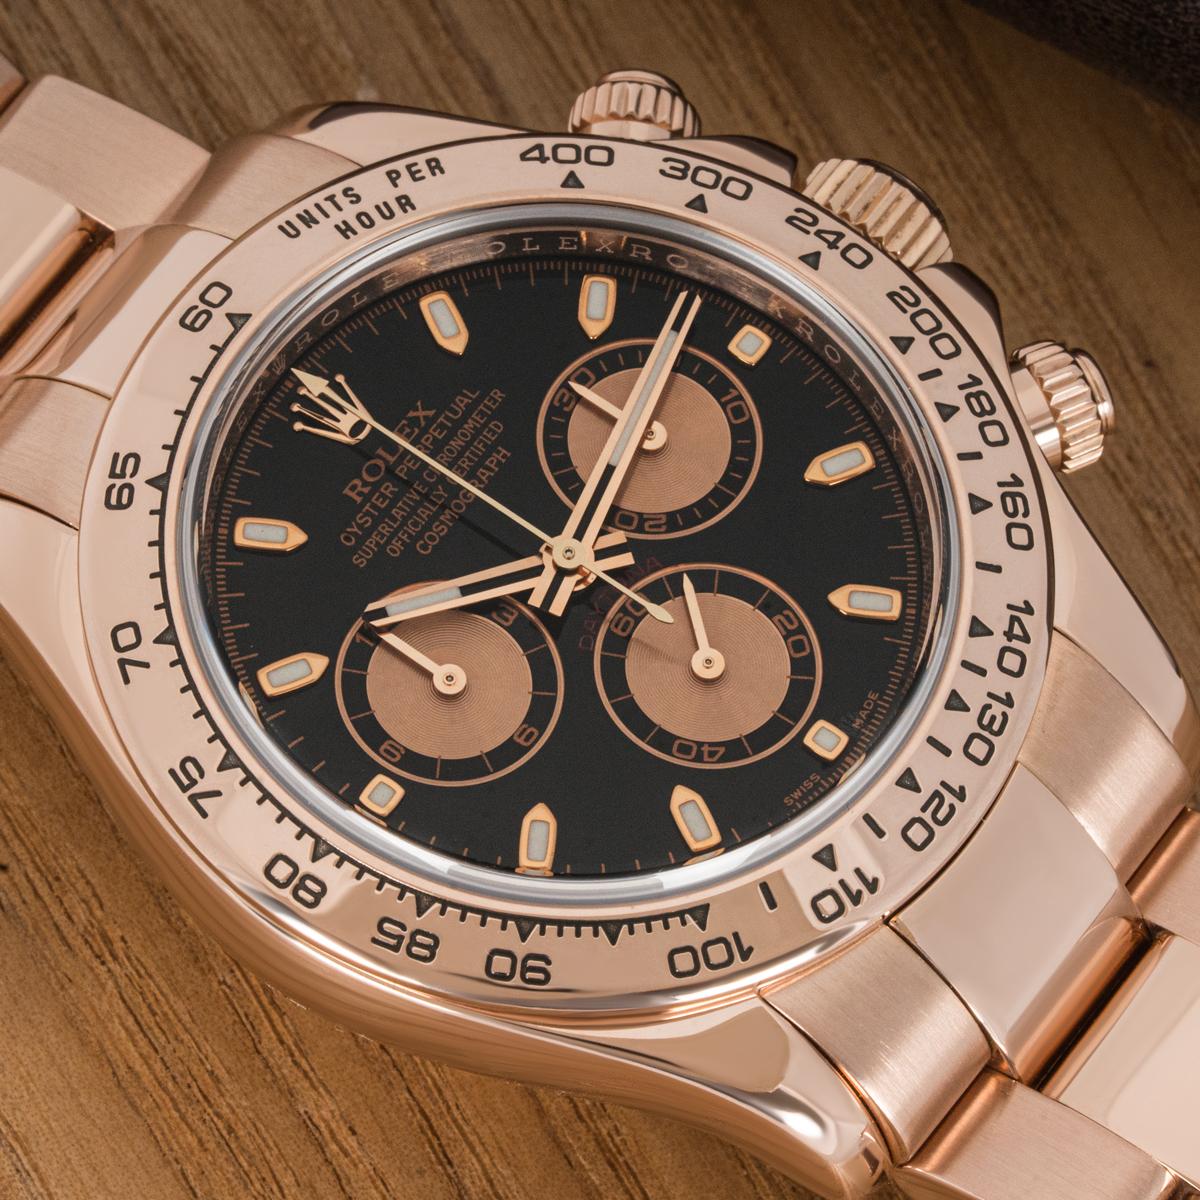 A rose gold Daytona by Rolex. Featuring a black and pink dial with chronograph counters. With its engraved tachymetric scale, three counters and pushers, this is a high-performance chronograph.

Fitted with sapphire crystal and the calibre 4130